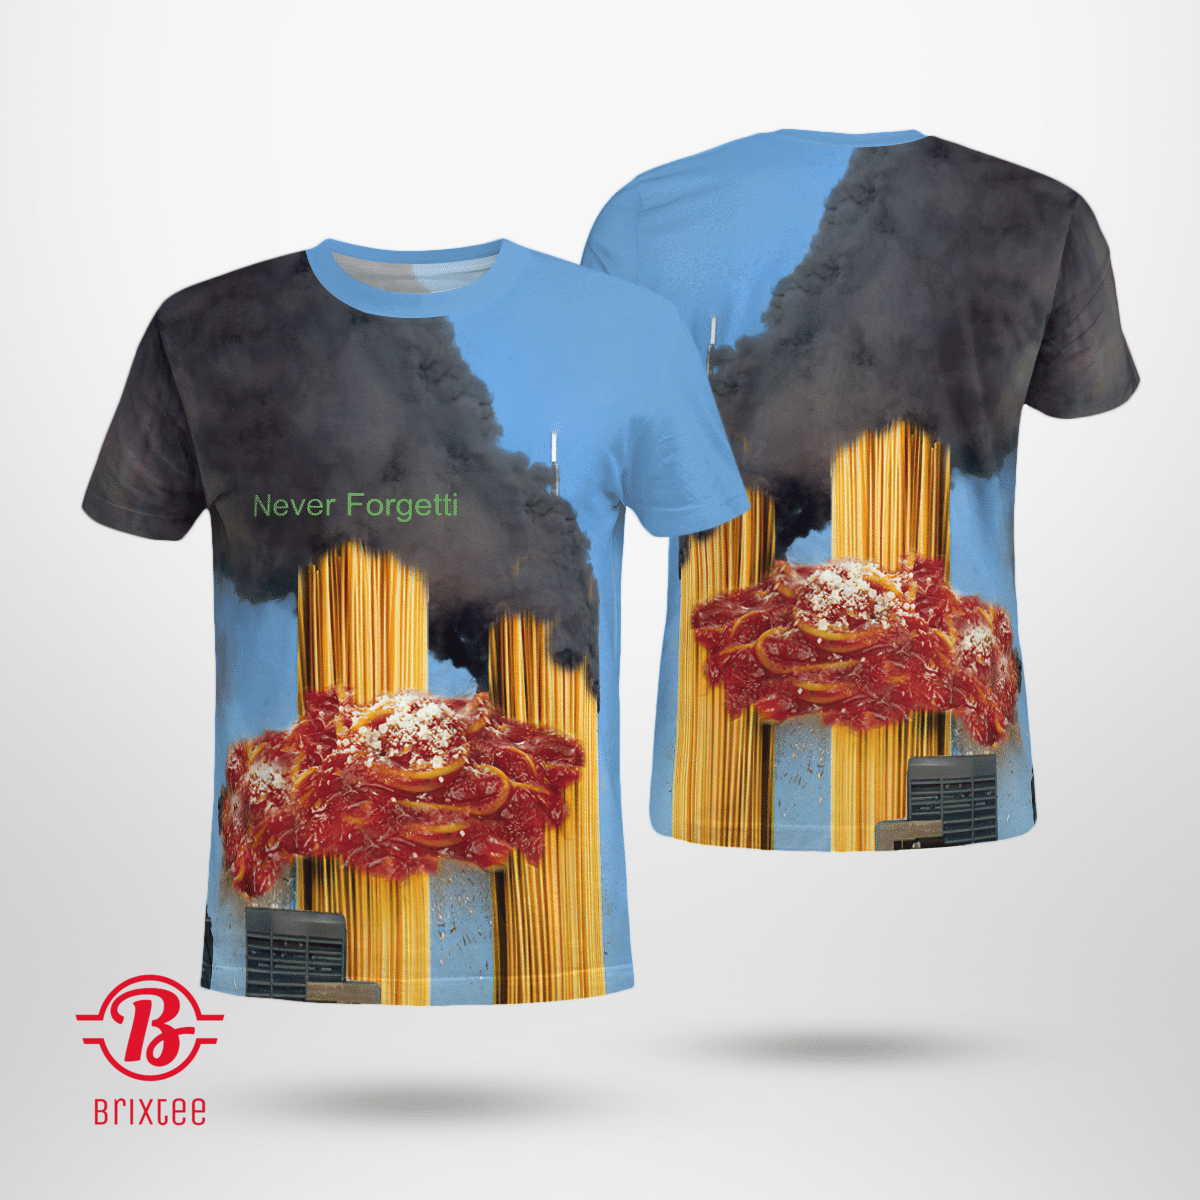 Never Forgetti Shirt